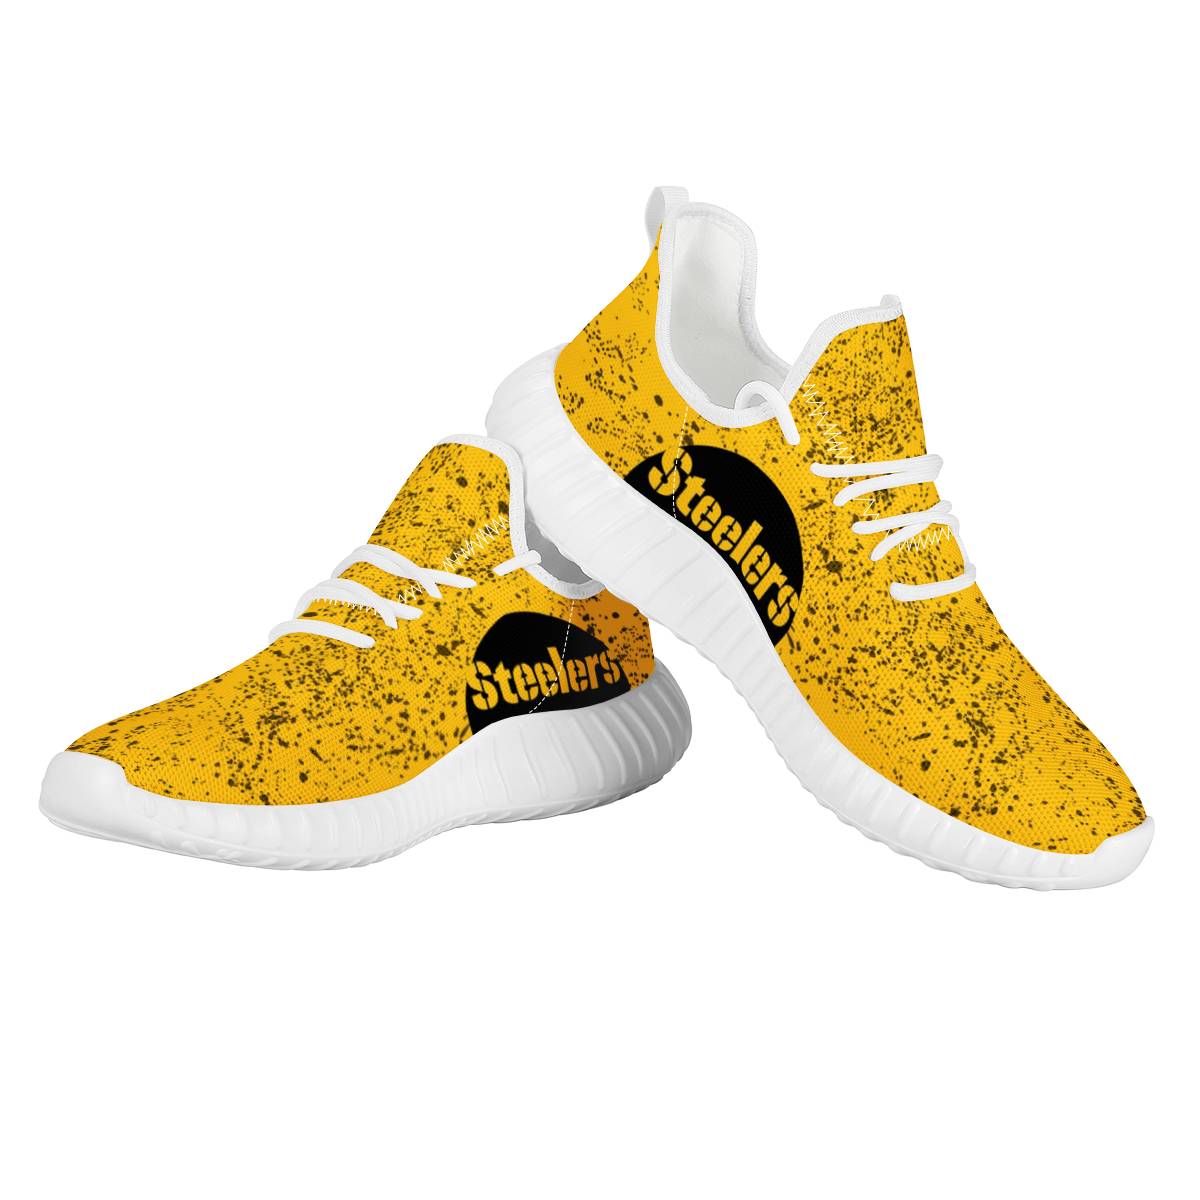 Men's Pittsburgh Steelers Mesh Knit Sneakers/Shoes 019